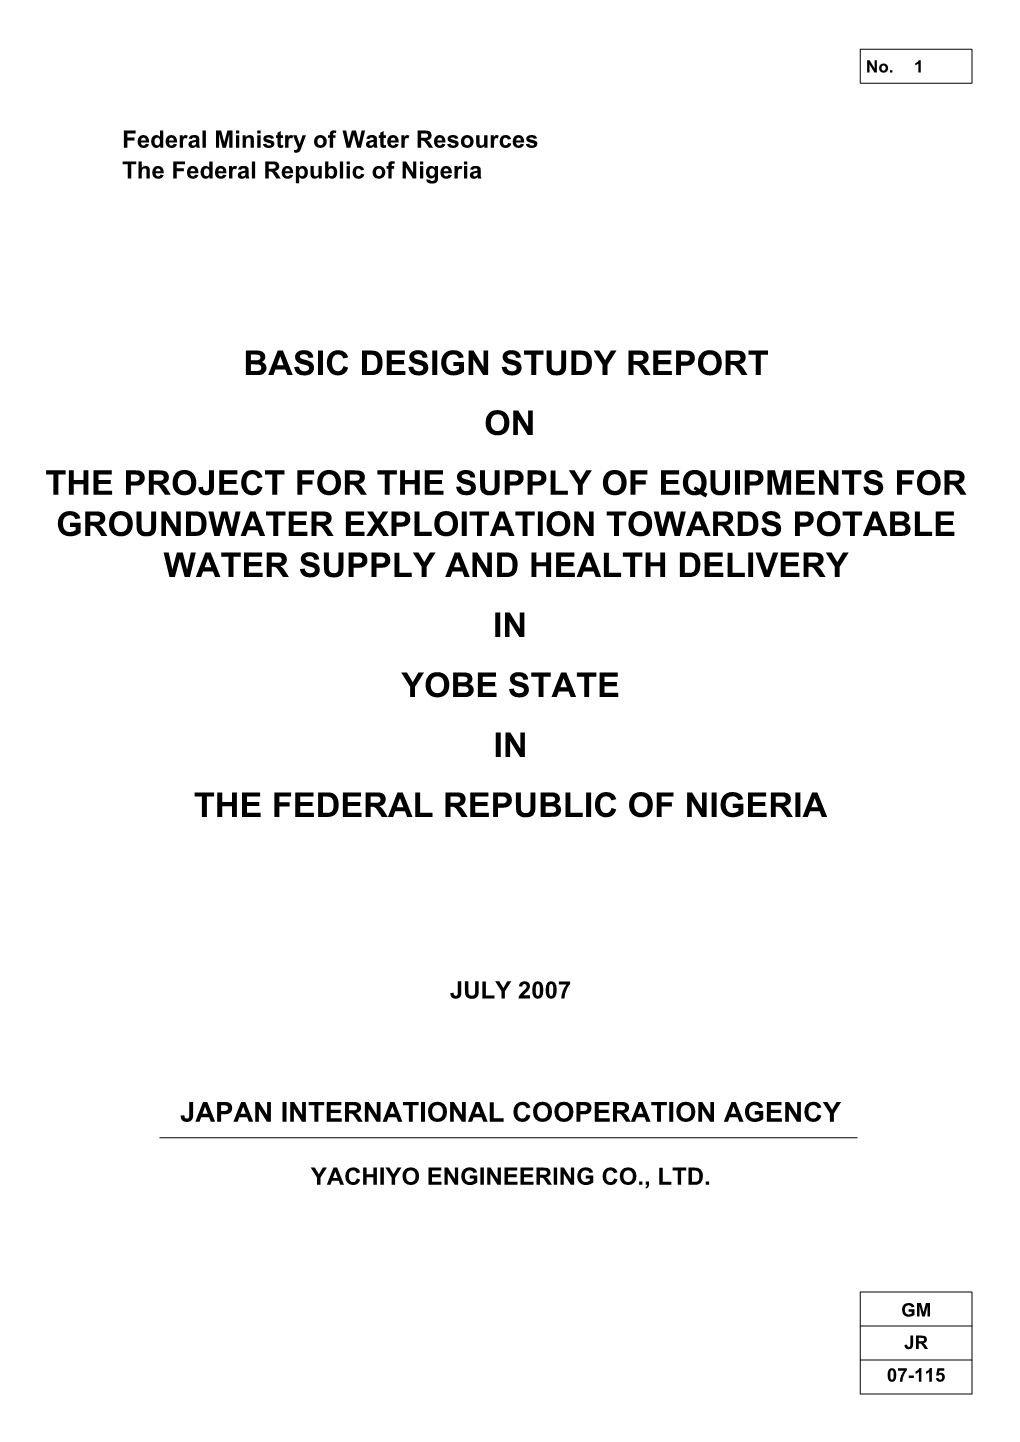 Basic Design Study Report on the Project for the Supply of Equipments for Groundwater Exploitation Towards Potable Water Supply and Health Delivery